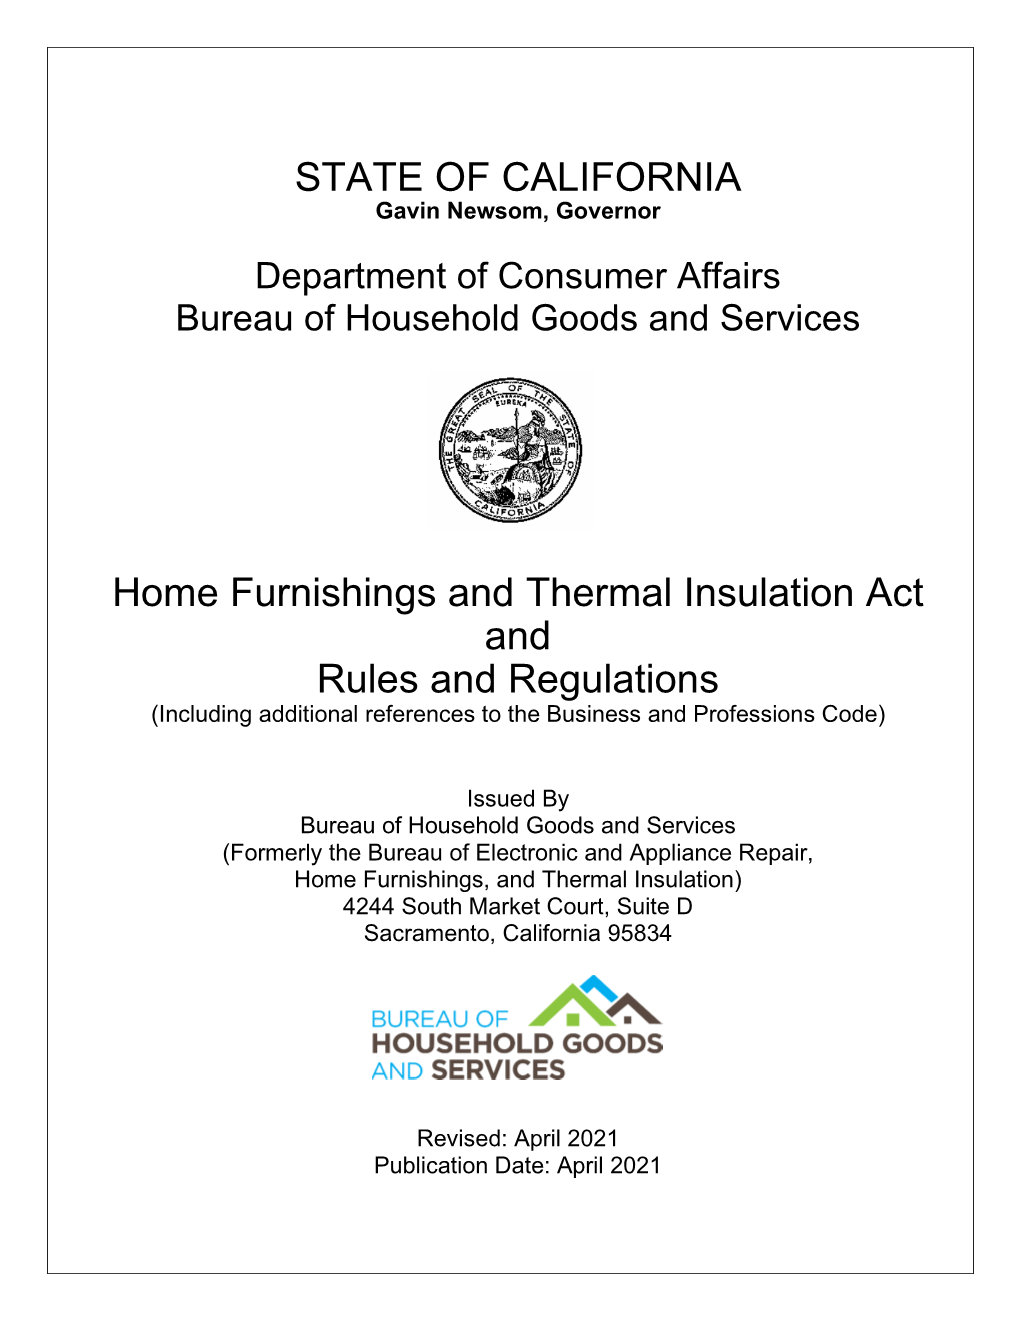 Home Furnishings and Thermal Insulation Act and Rules and Regulations (Including Additional References to the Business and Professions Code)